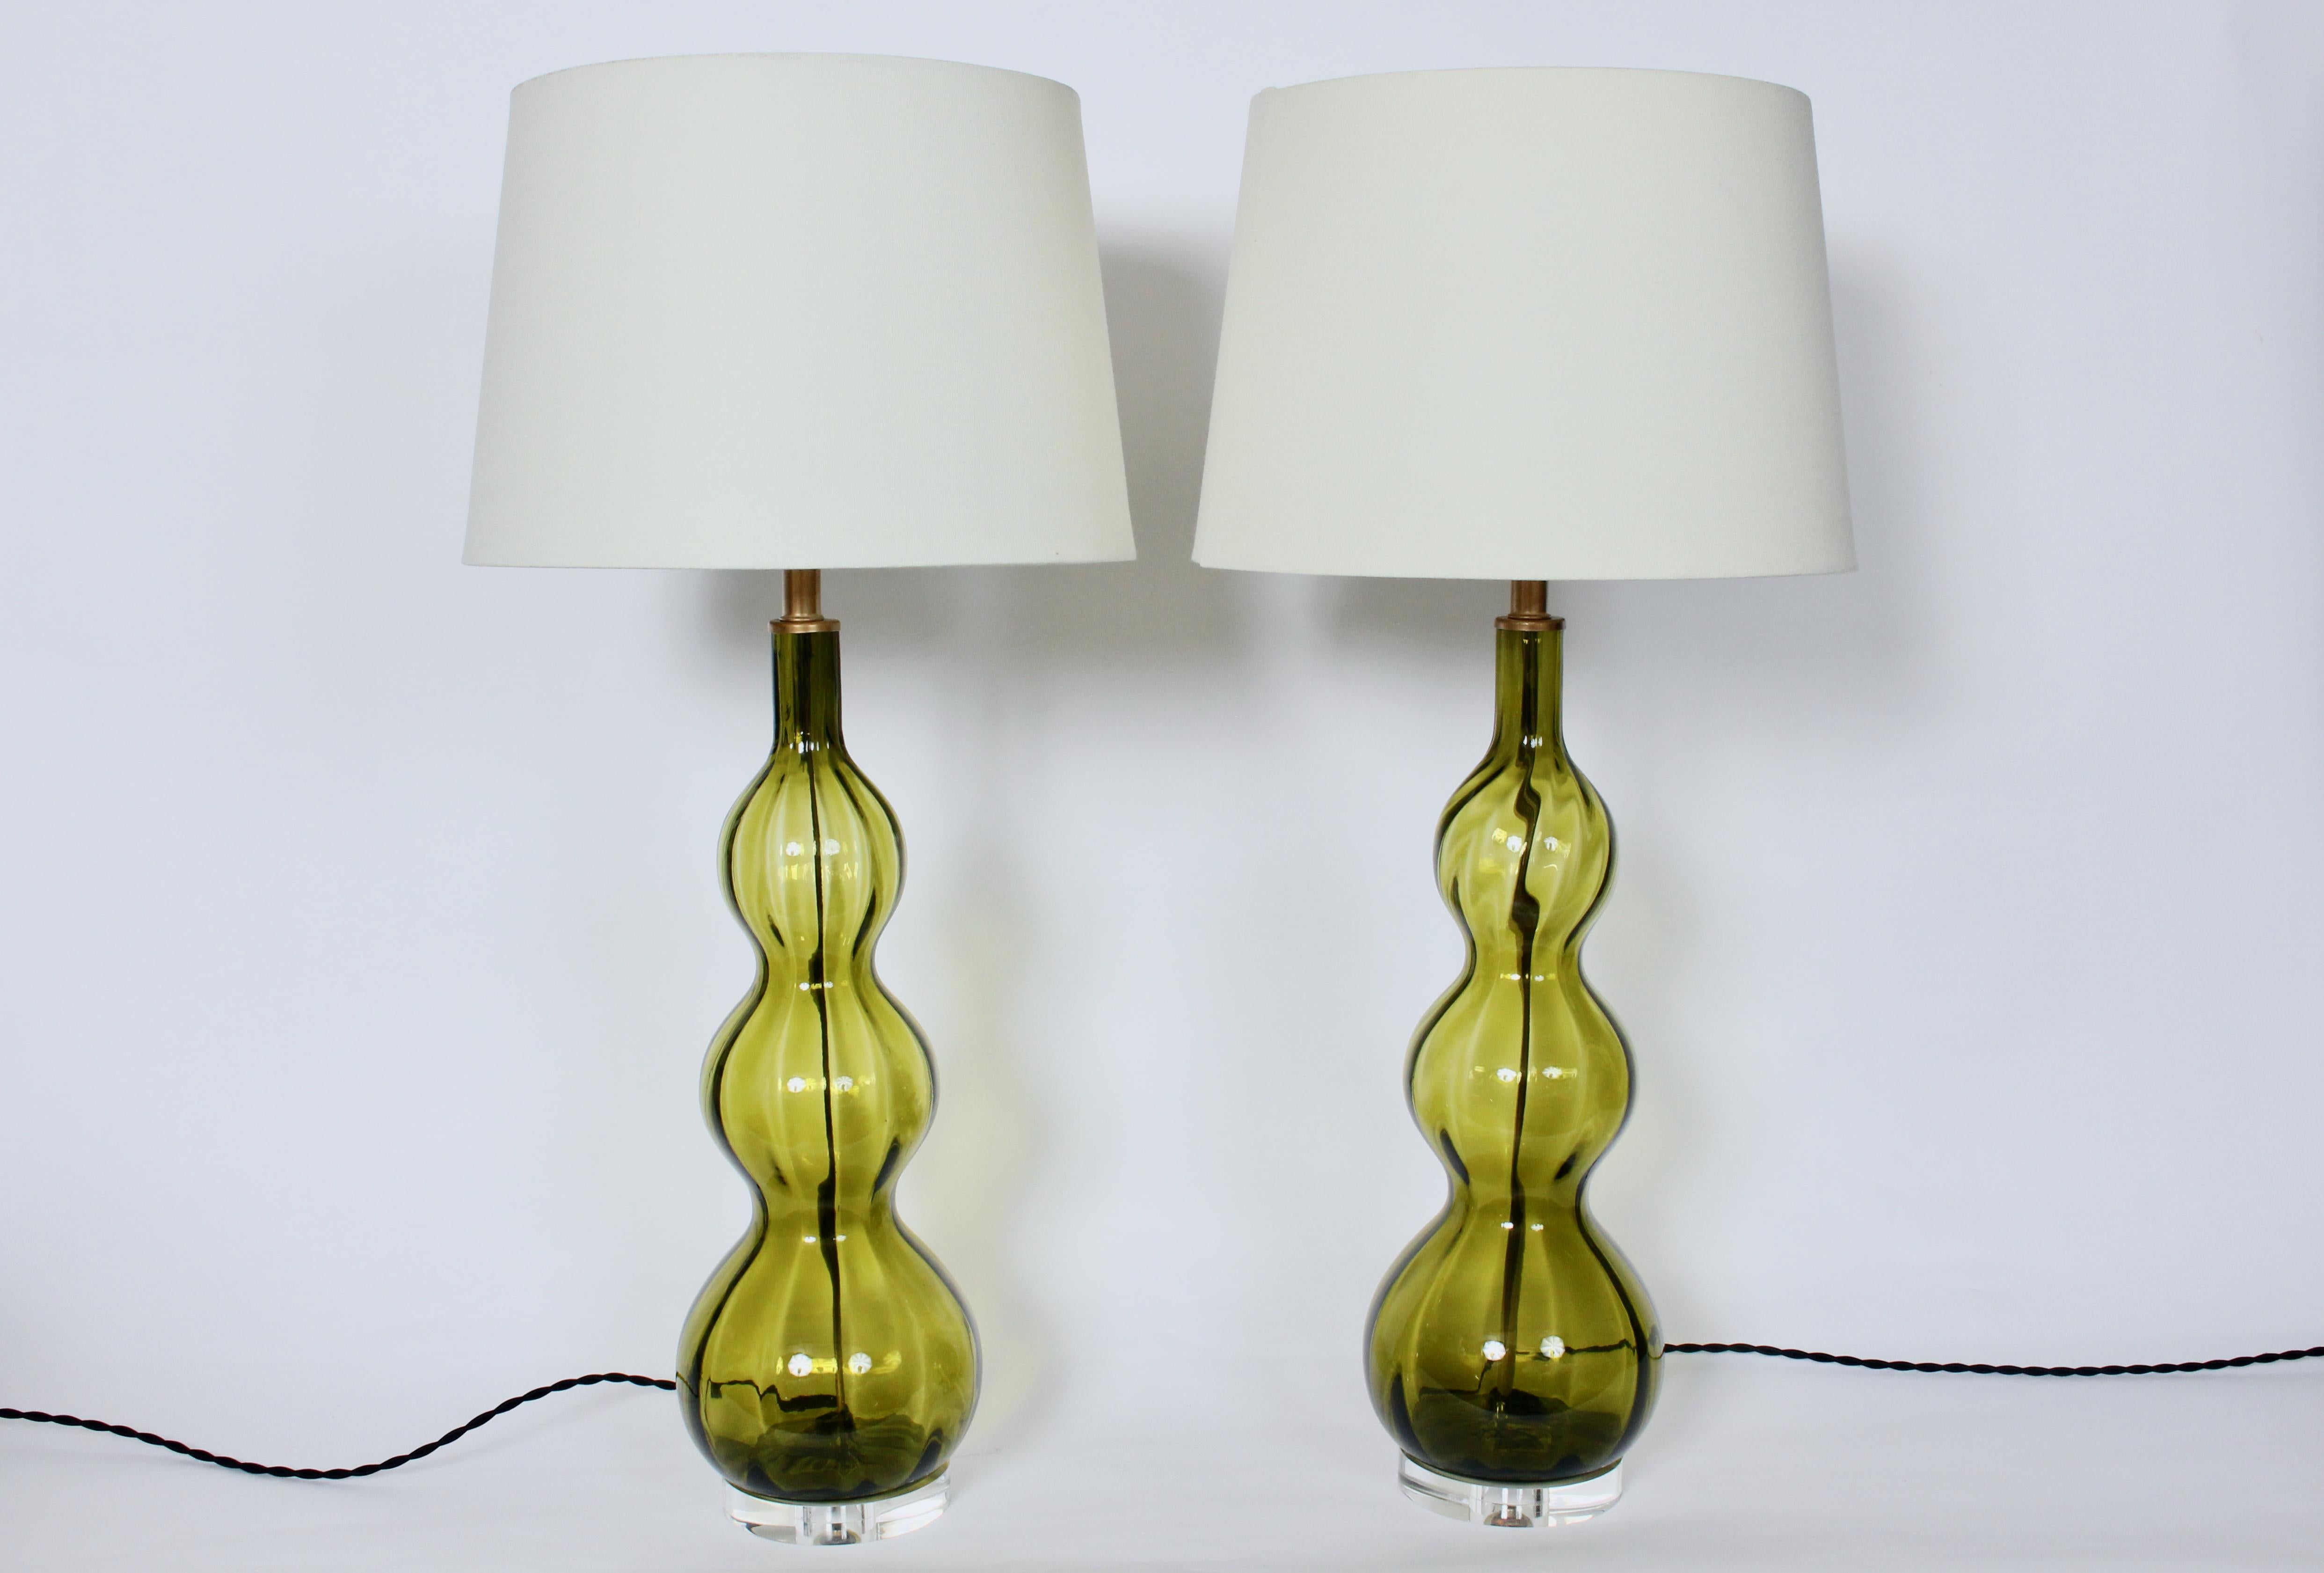 Tall Pair of Stacked Triple Gourd Olive Green Art Glass Table Lamps, 1950s In Good Condition For Sale In Bainbridge, NY